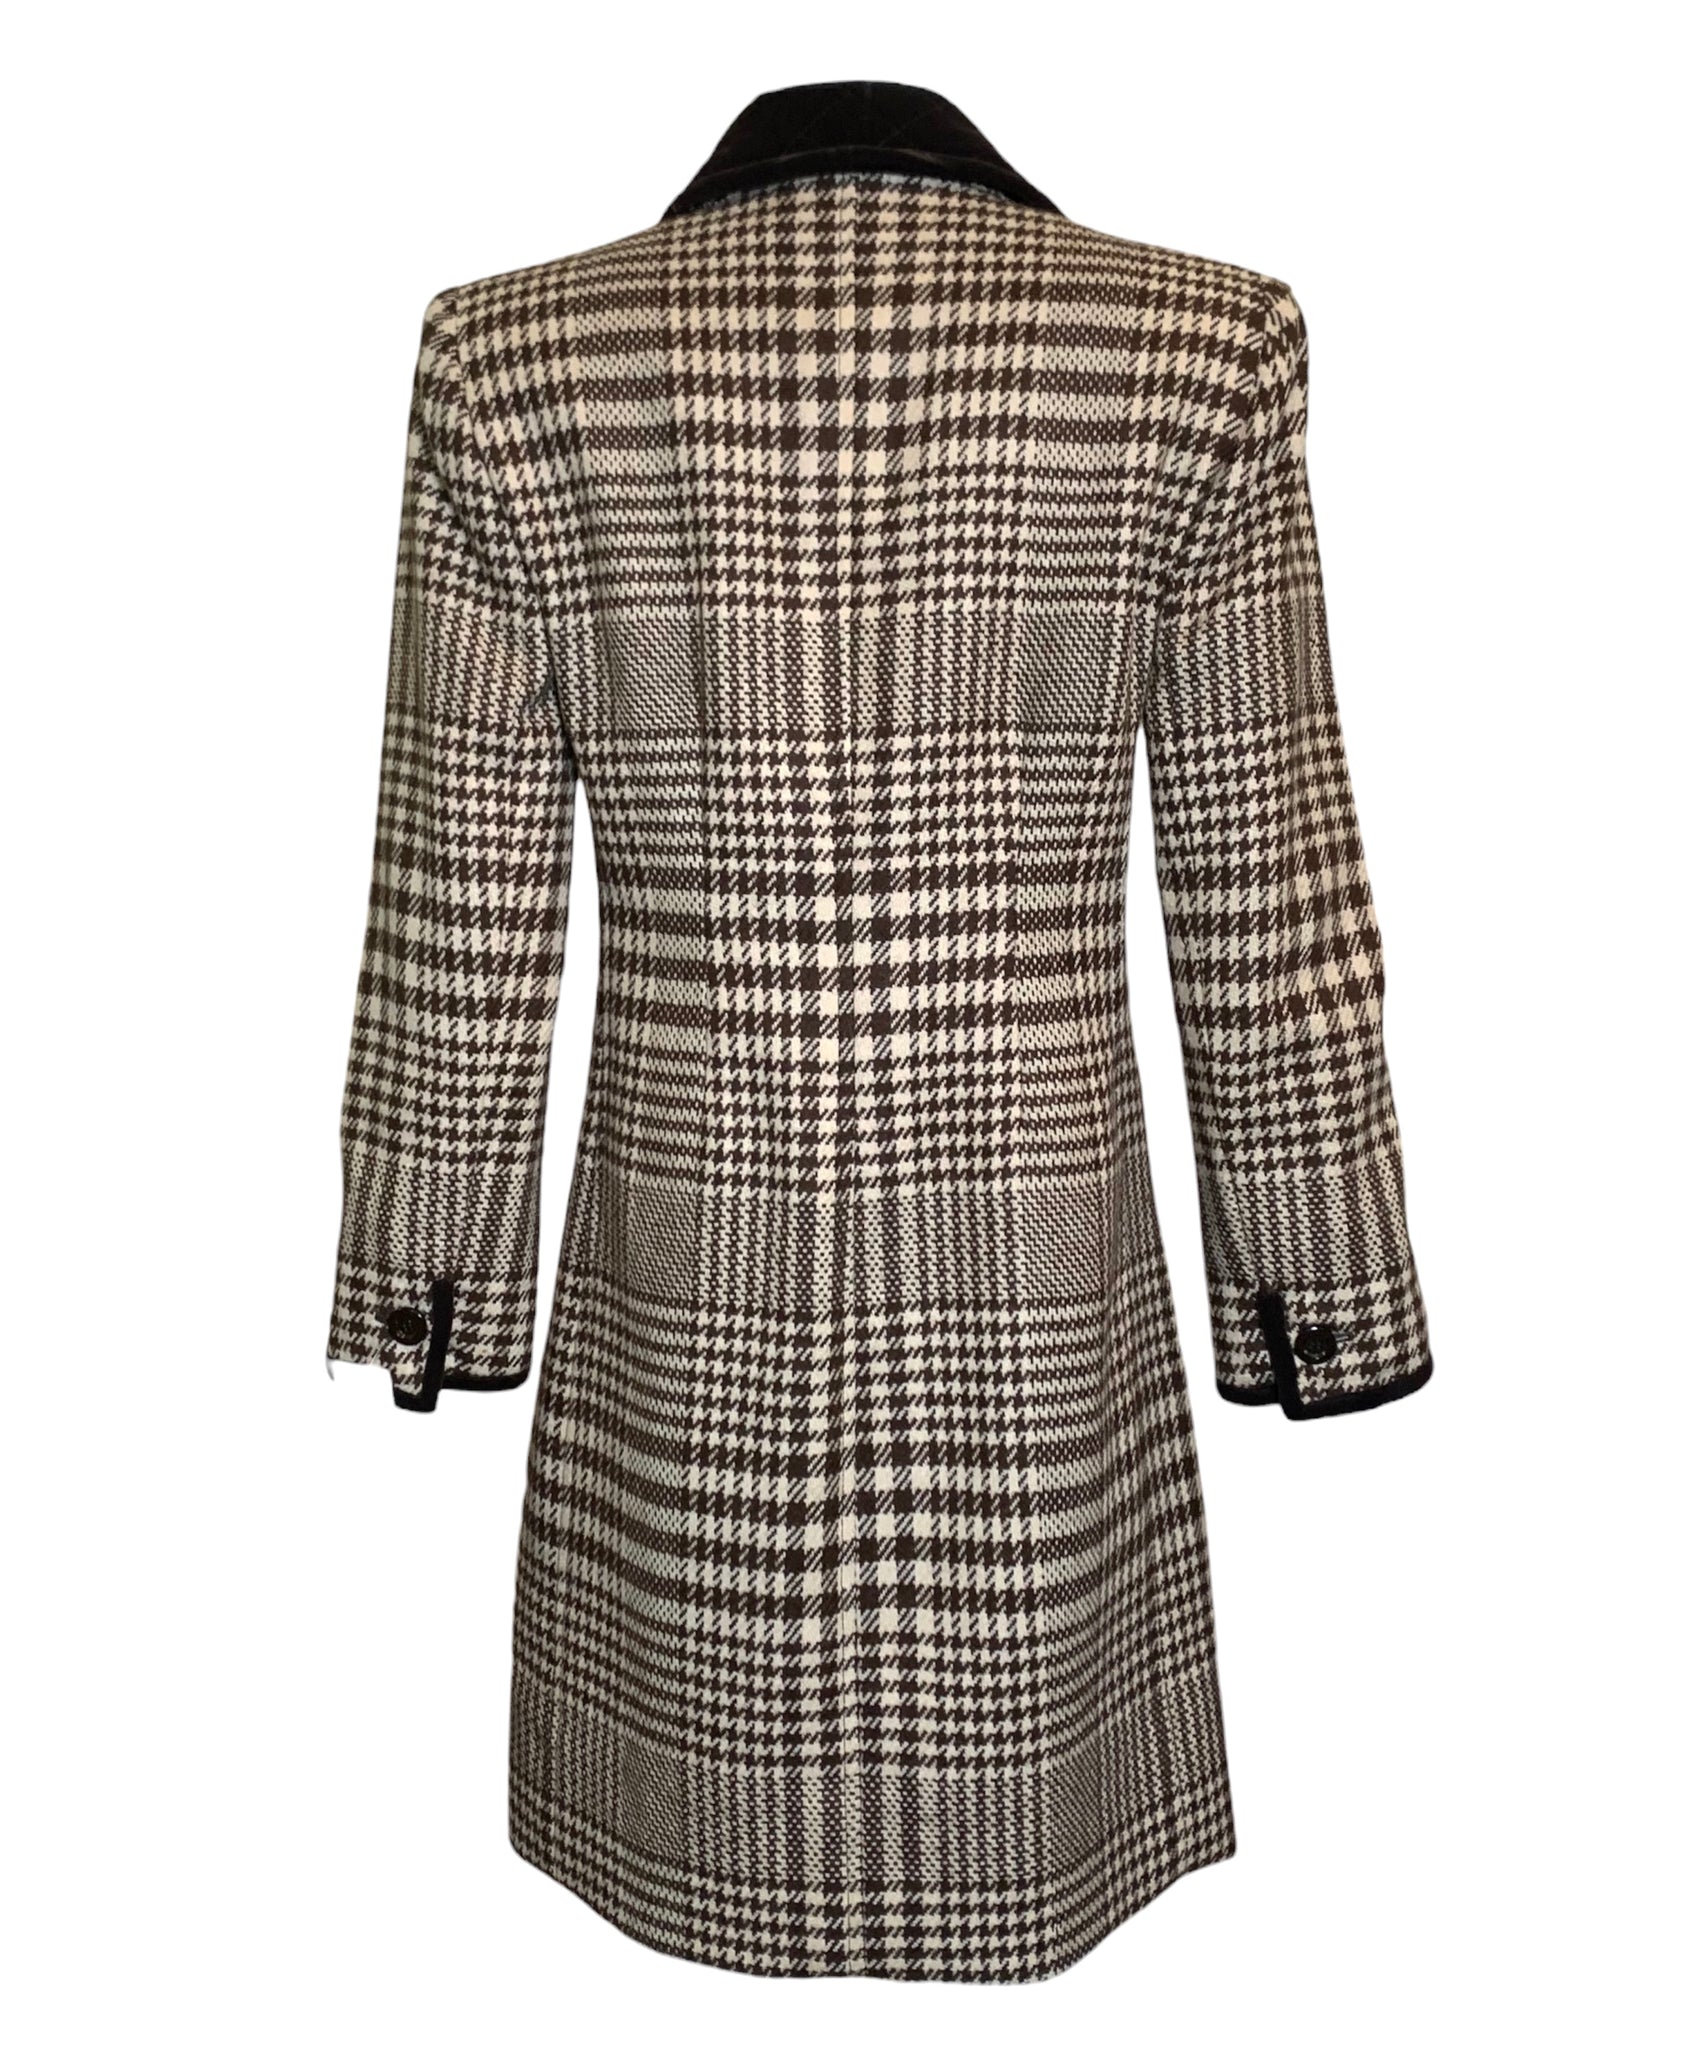   Valentino Brown and Ivory Houndstooth Wool Dress Coat with Velvet Trim BACK 3 of 6